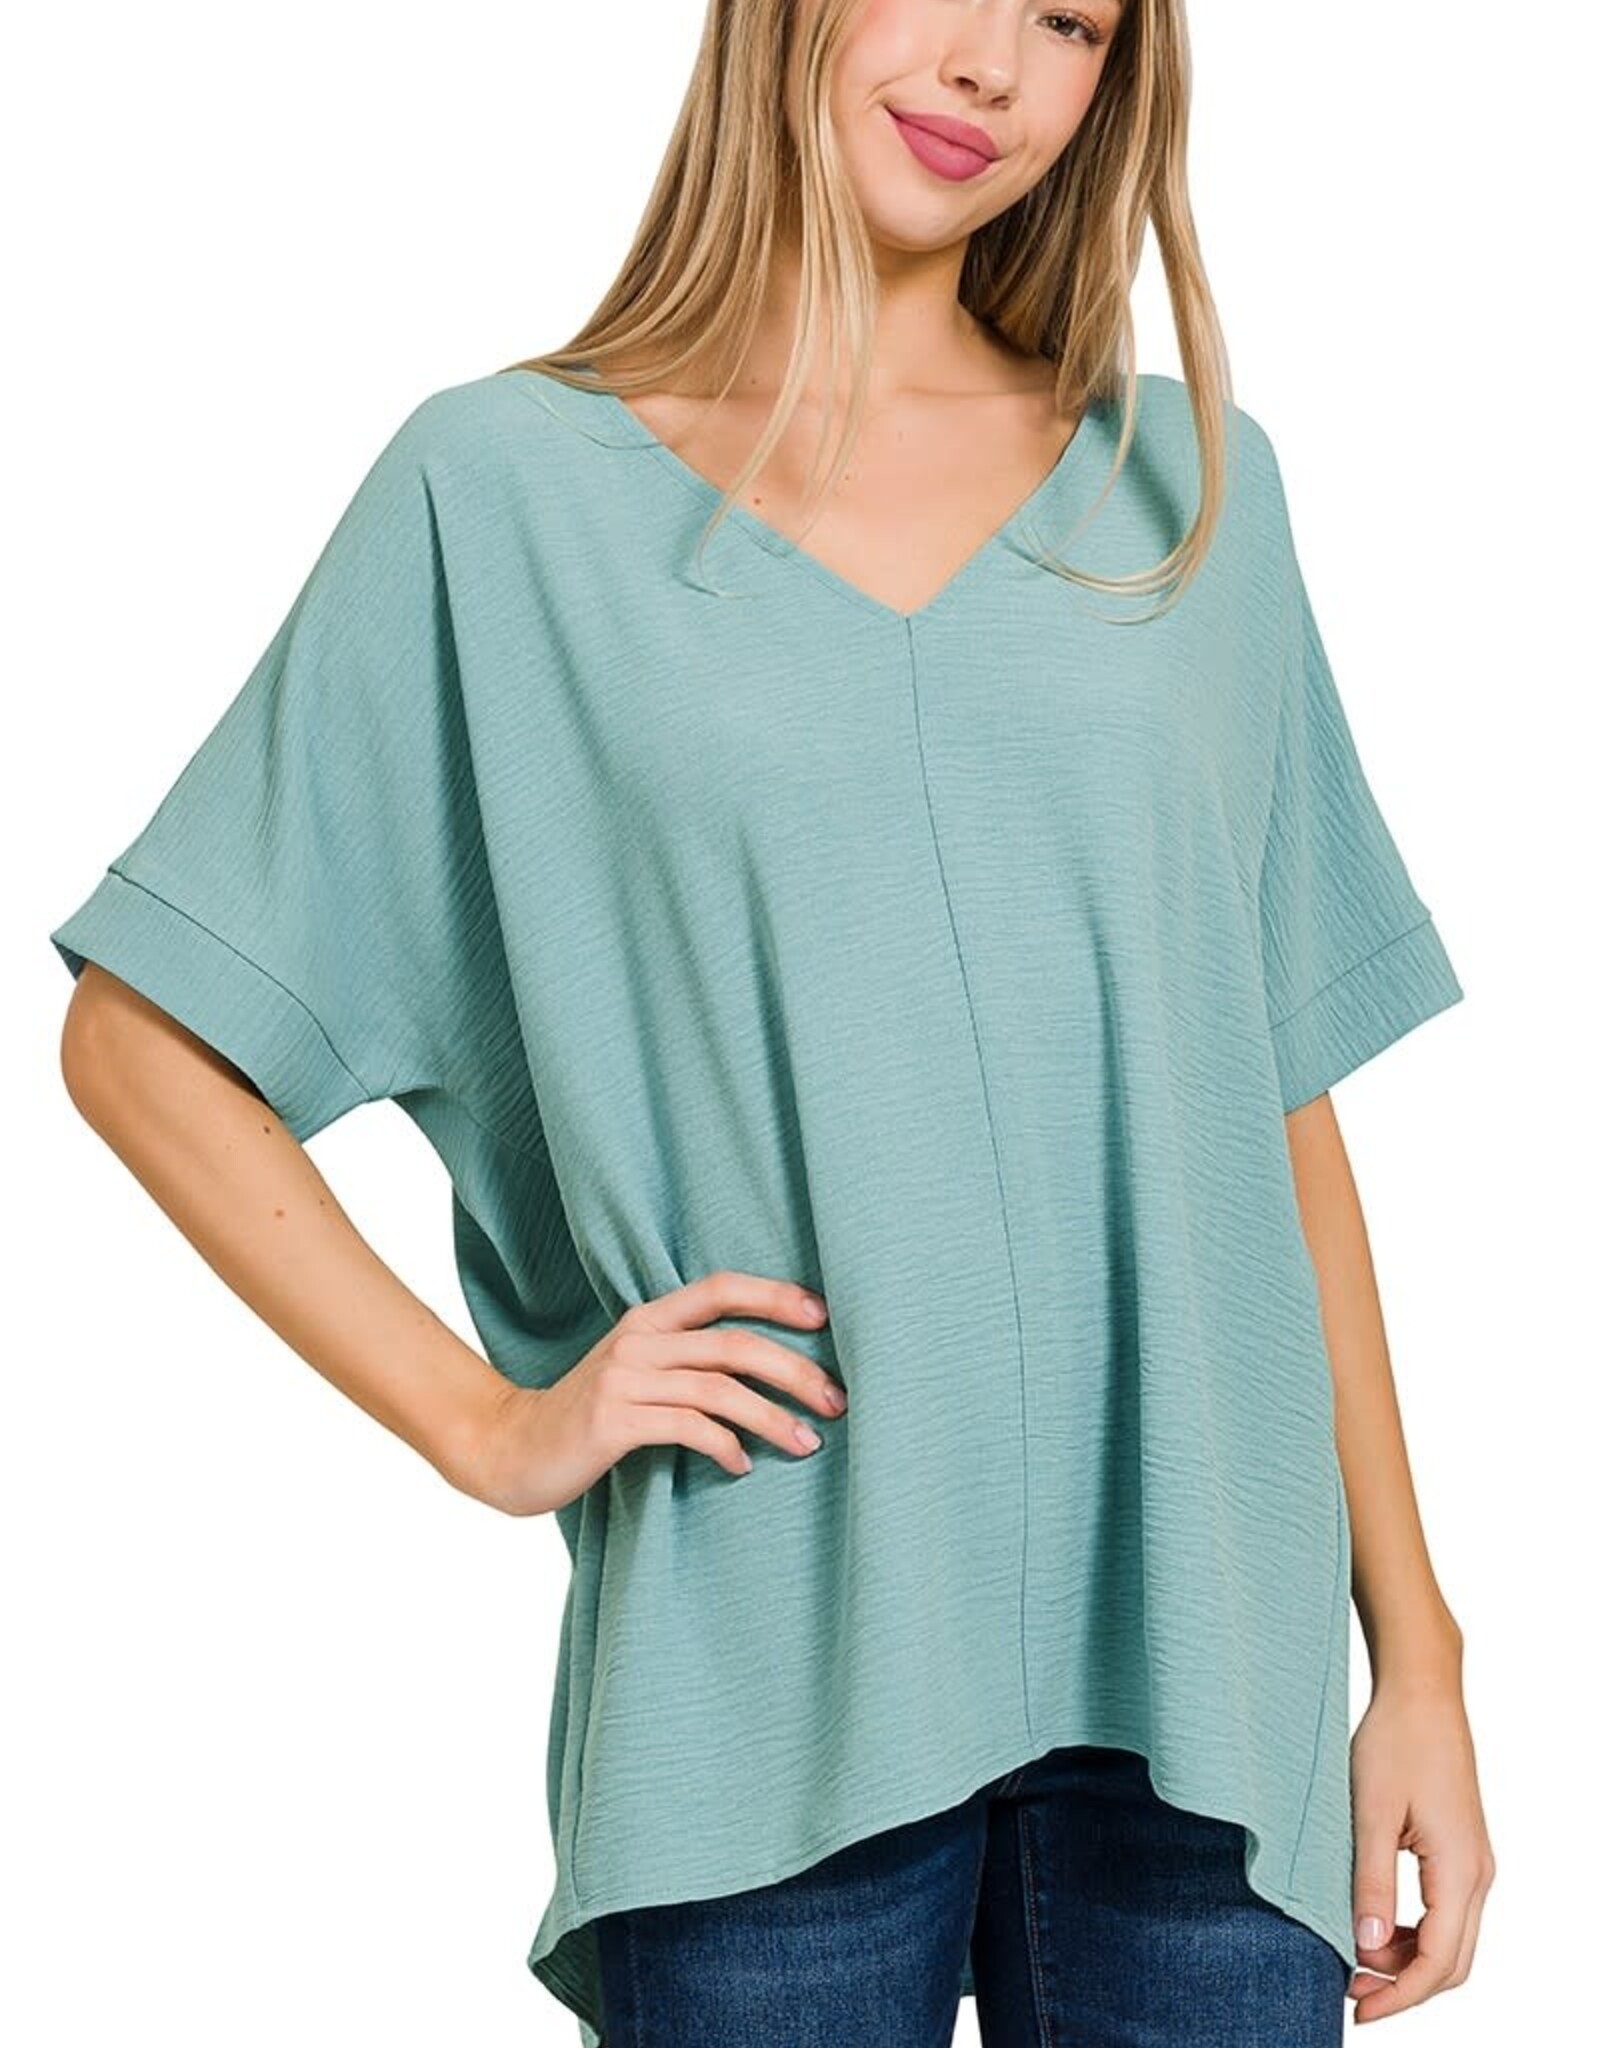 Miss Bliss Woven Airflow V Neck Doman Top